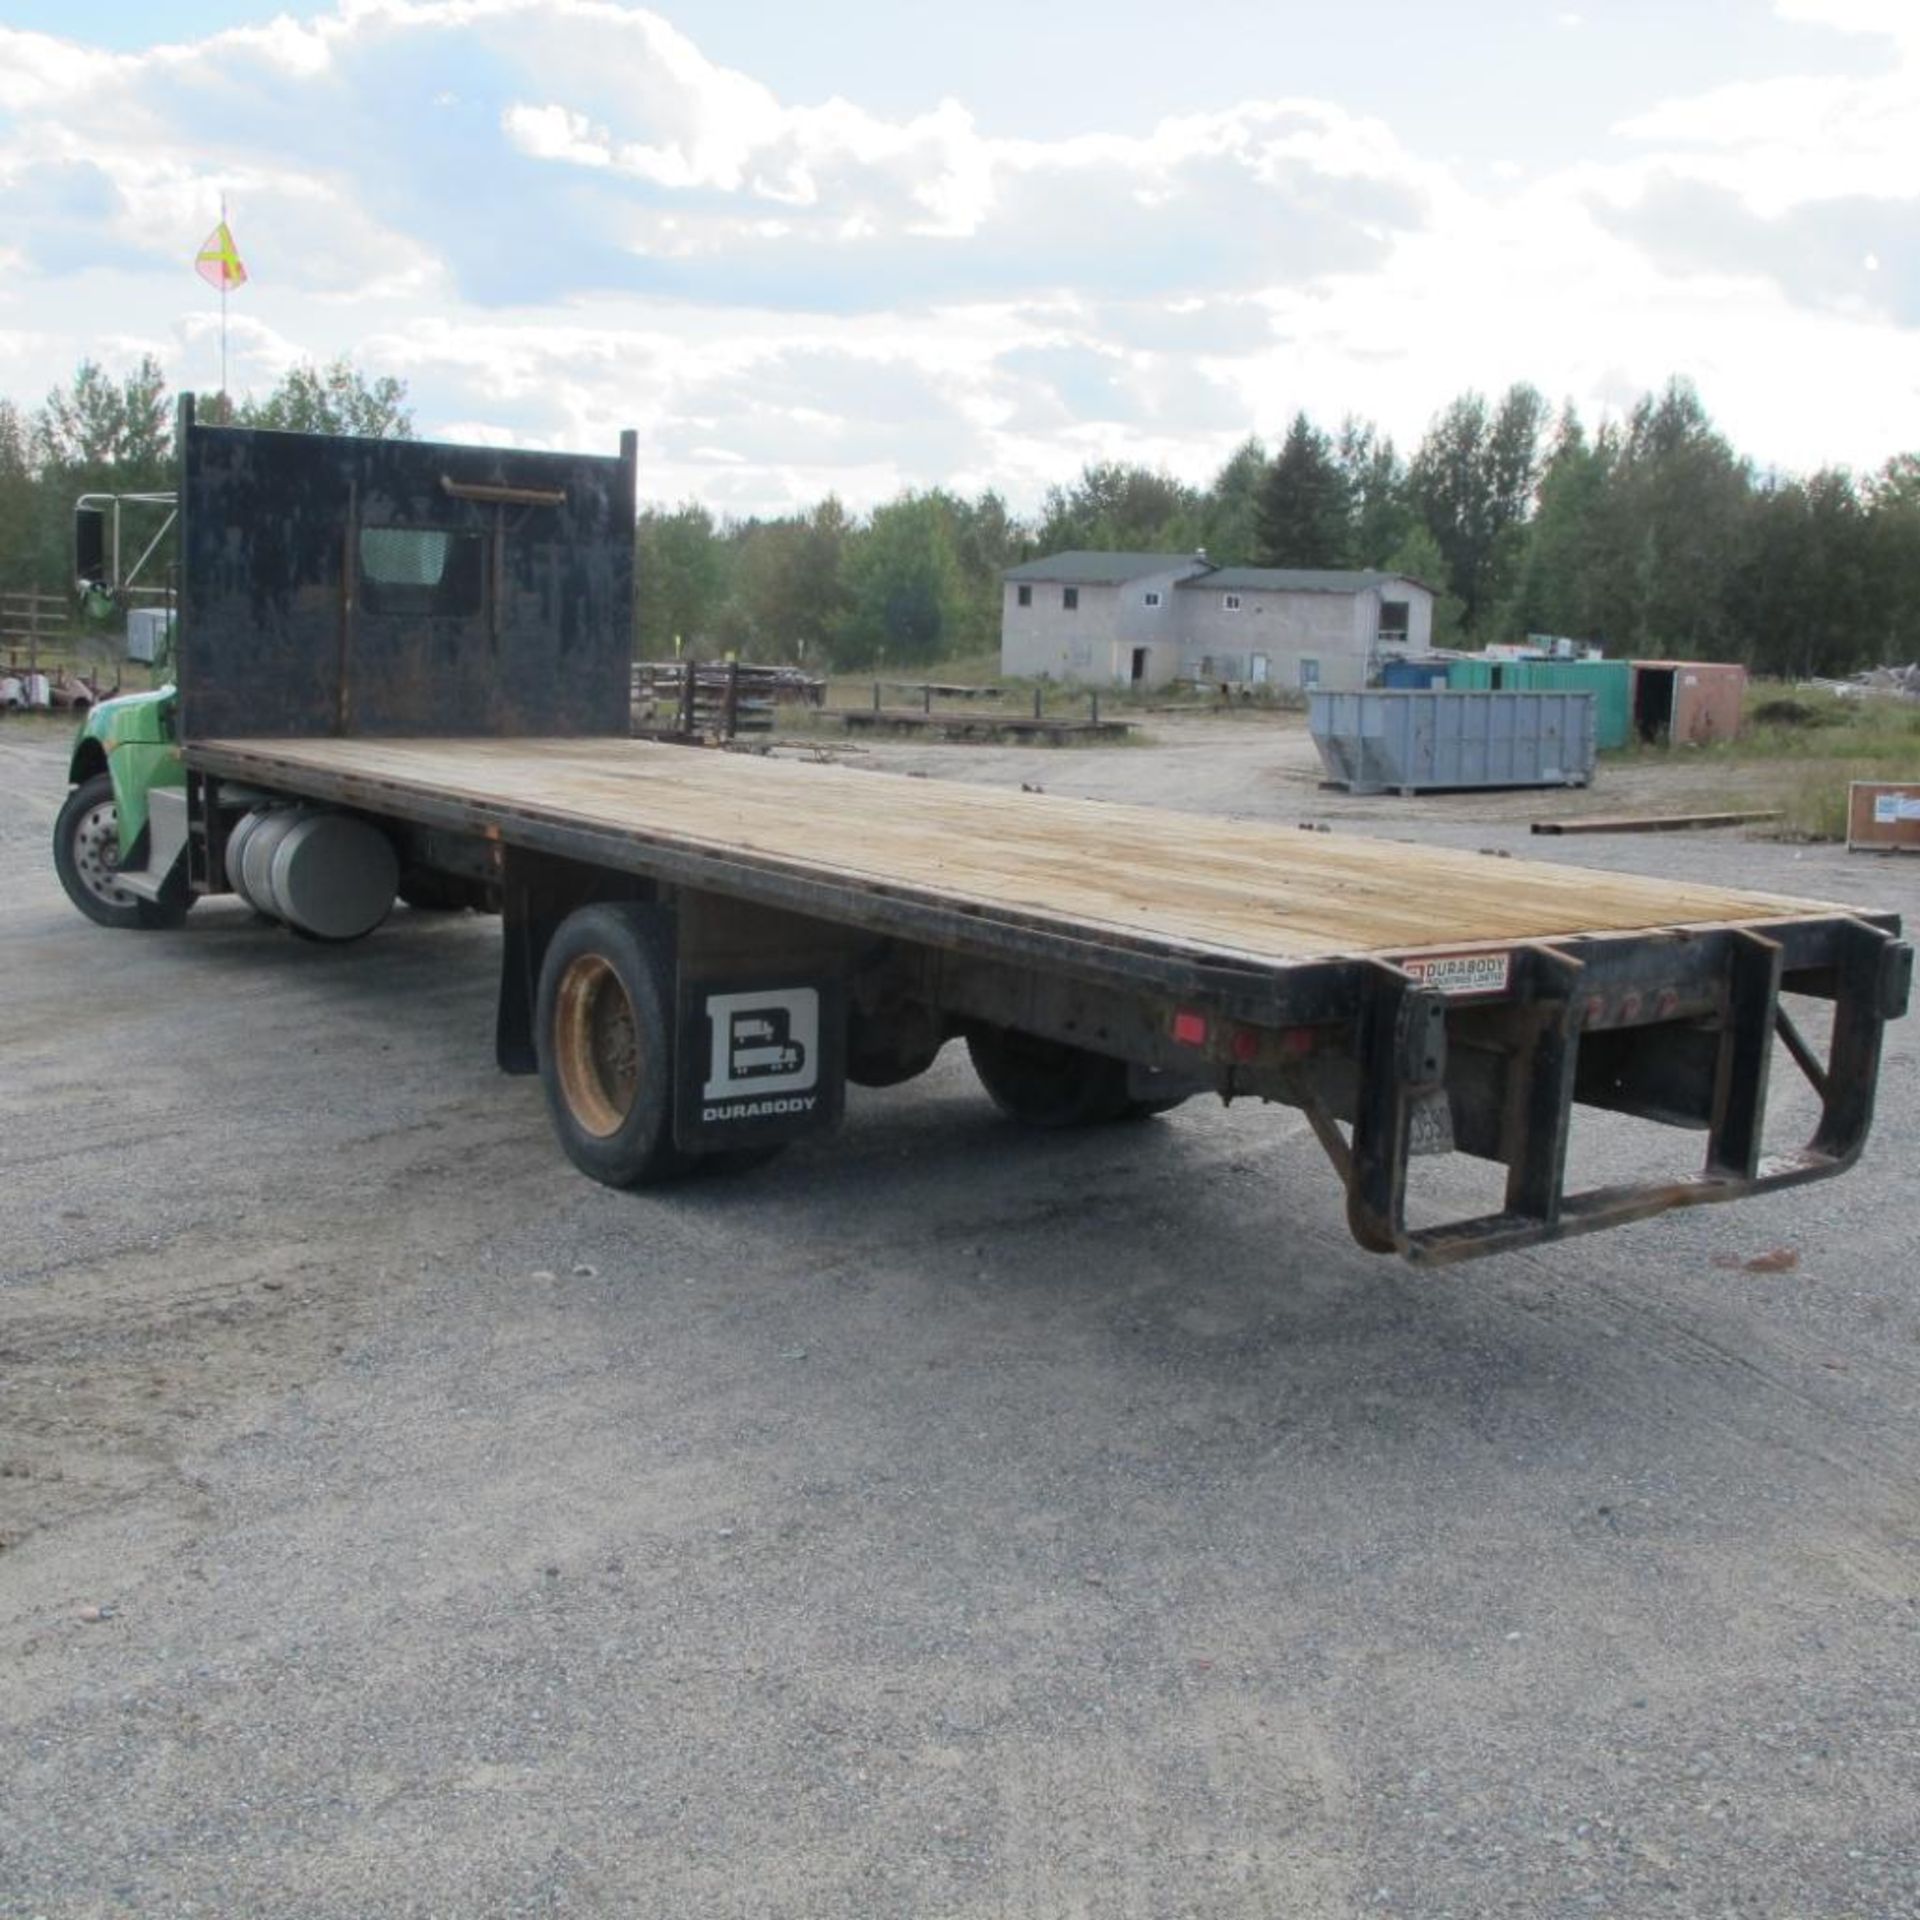 2013 KENWORTH FLAT DECK TRUCK MODEL T270, 96009 KM INDICATED, 2609 HRS, (APPROX) 24' WOOD DECK, SING - Image 4 of 11